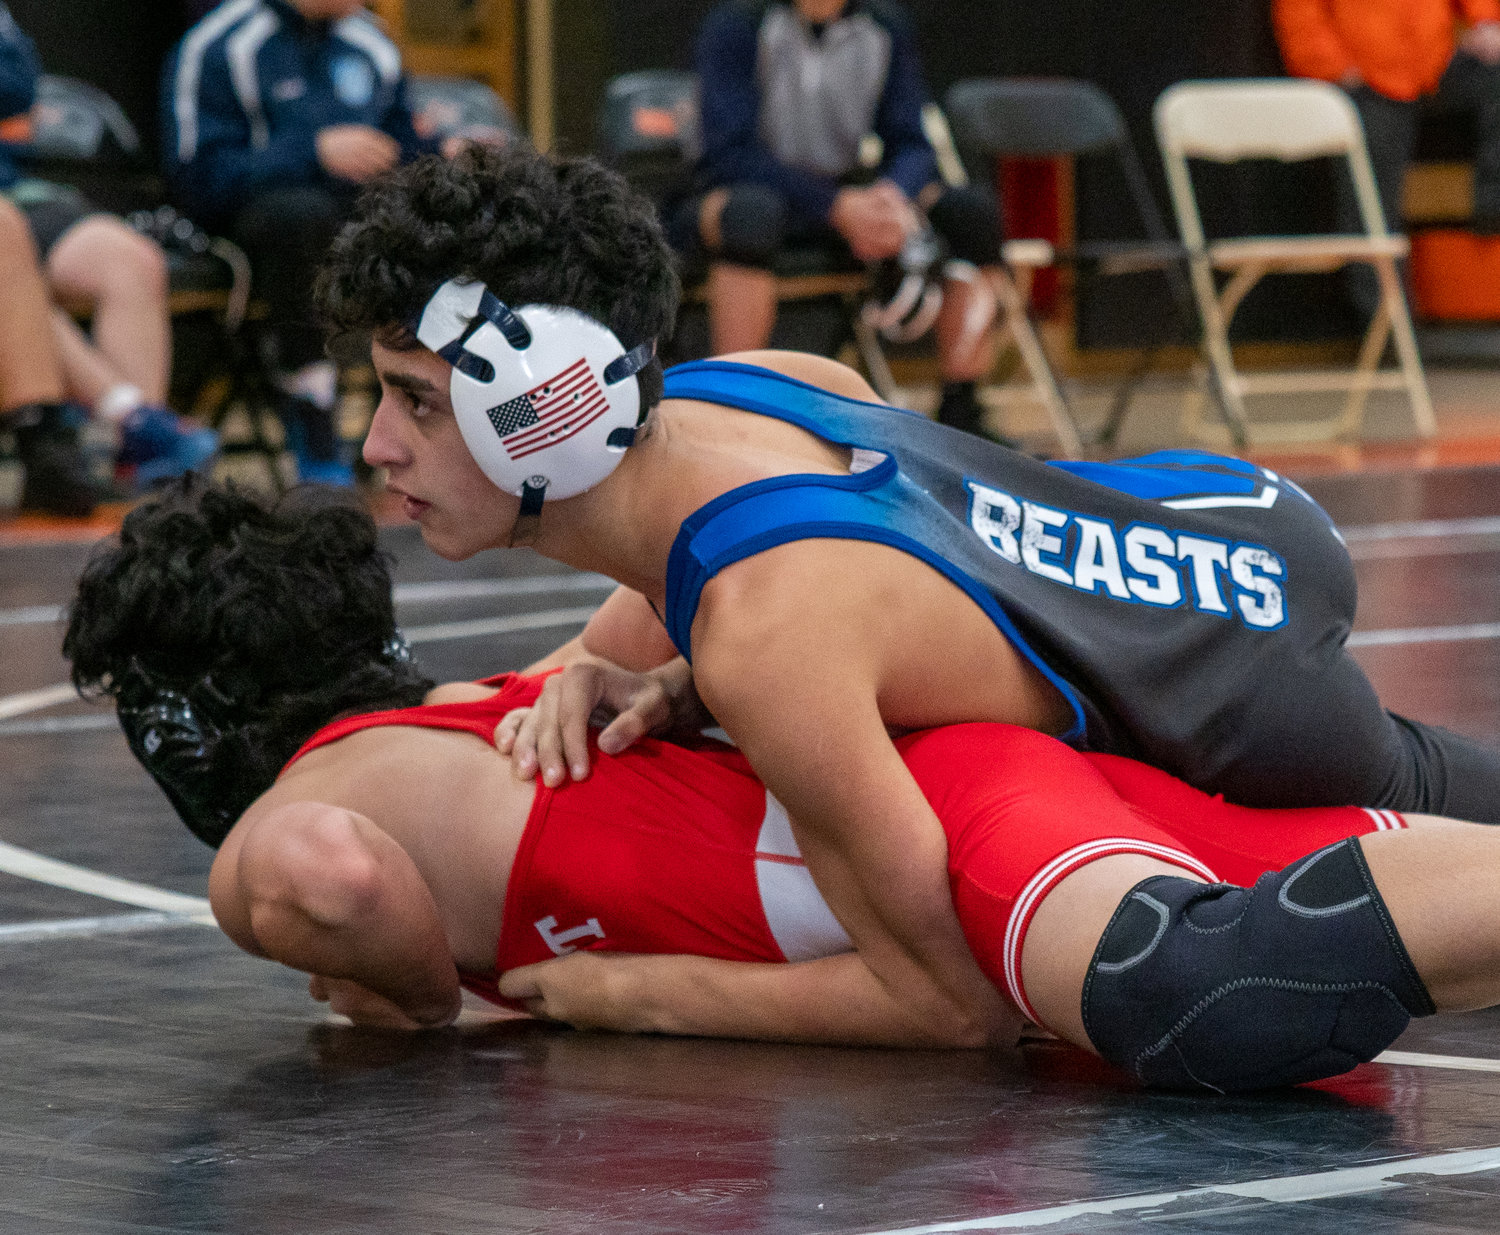 Joshua Aviles, top, a sophomore at Carey, is looking to make a deep run after winning two matches at the county tournament last season.